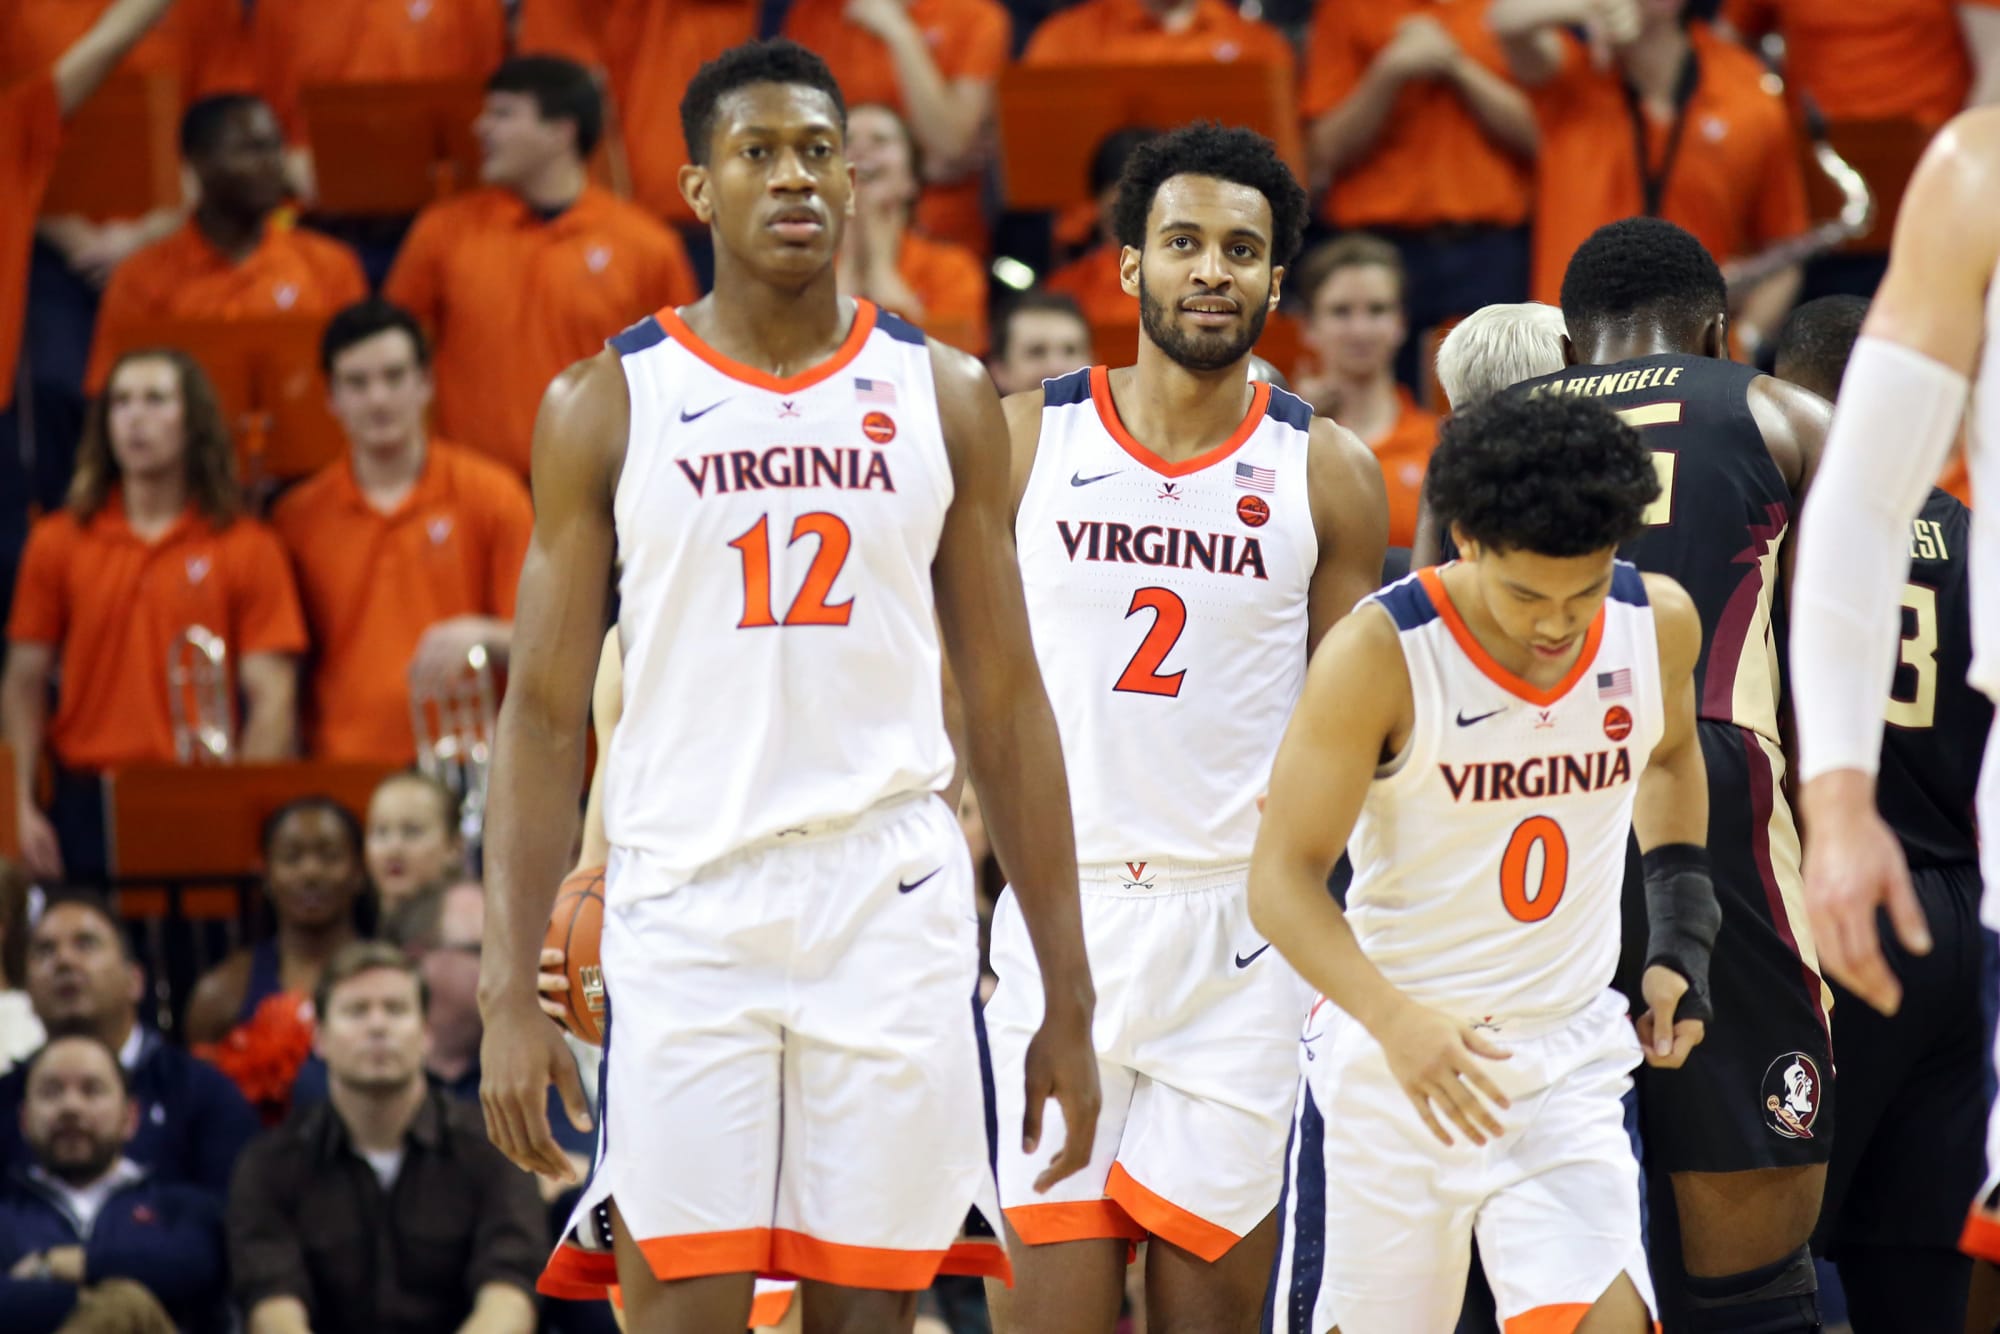 Virginia Basketball 201819 keys for Cavaliers to win at UNC